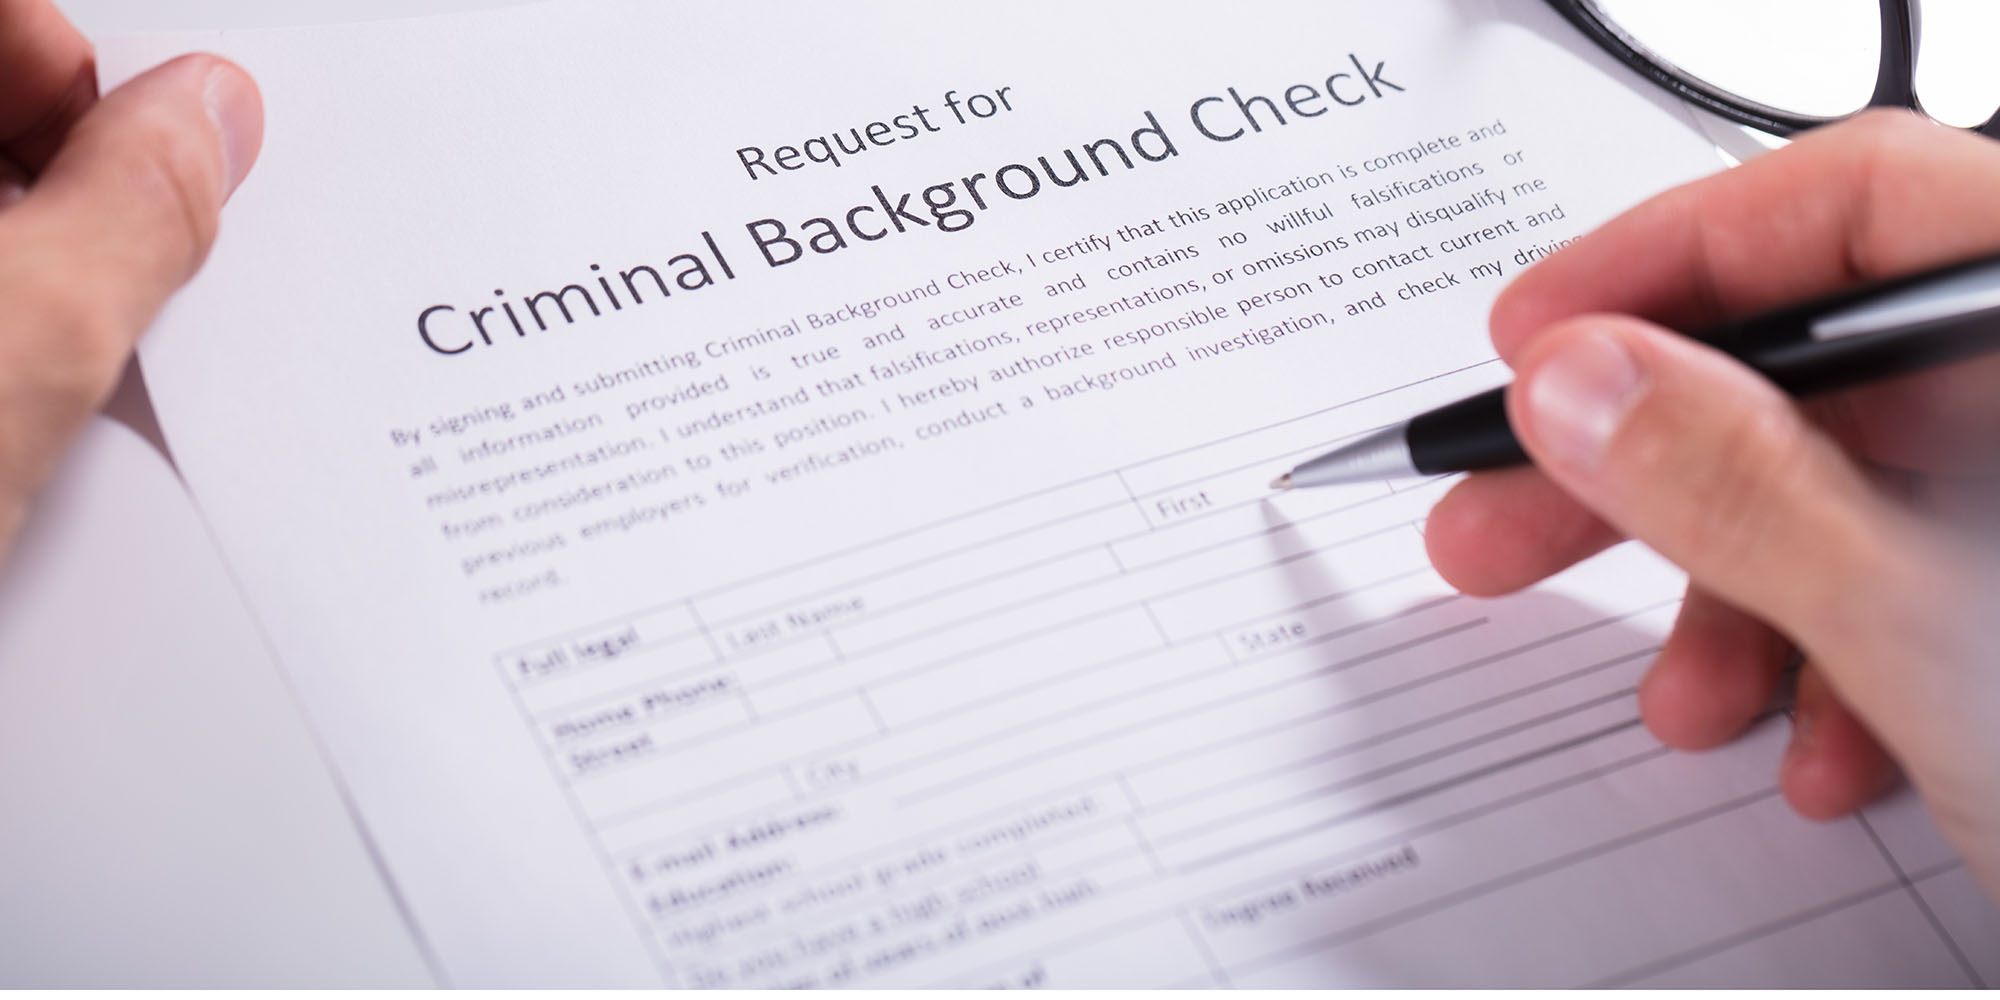 Person Hand Filling Criminal Background Check Application Form